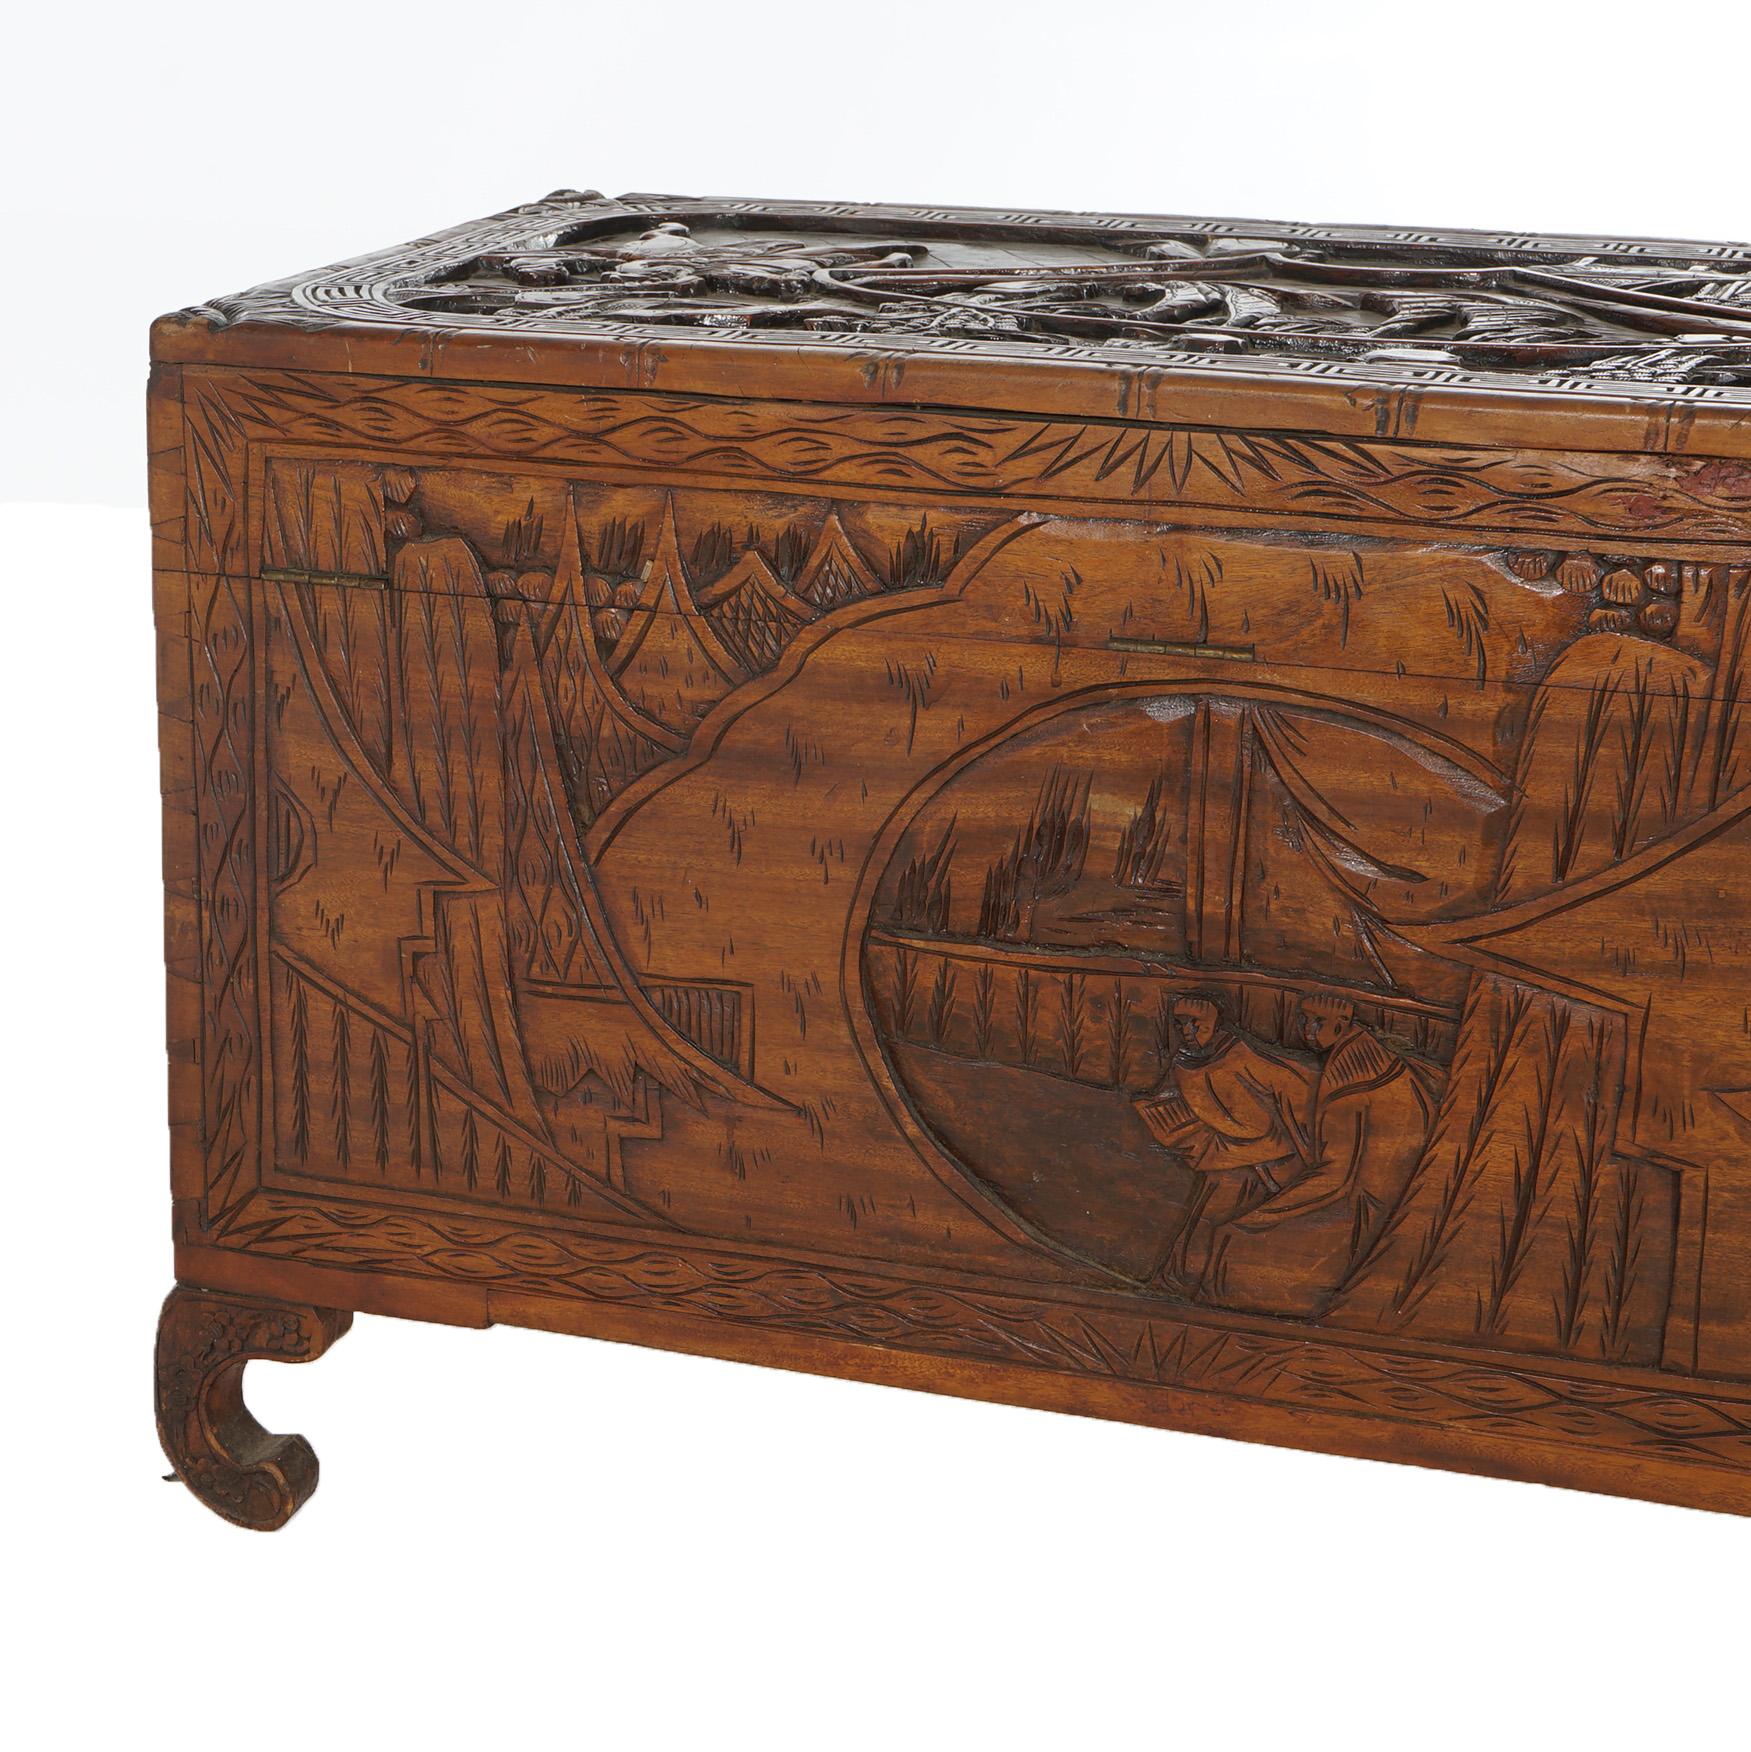 Antique Chinese Carved Hardwood Chest with Figures & Scenes in Relief C1920 For Sale 10